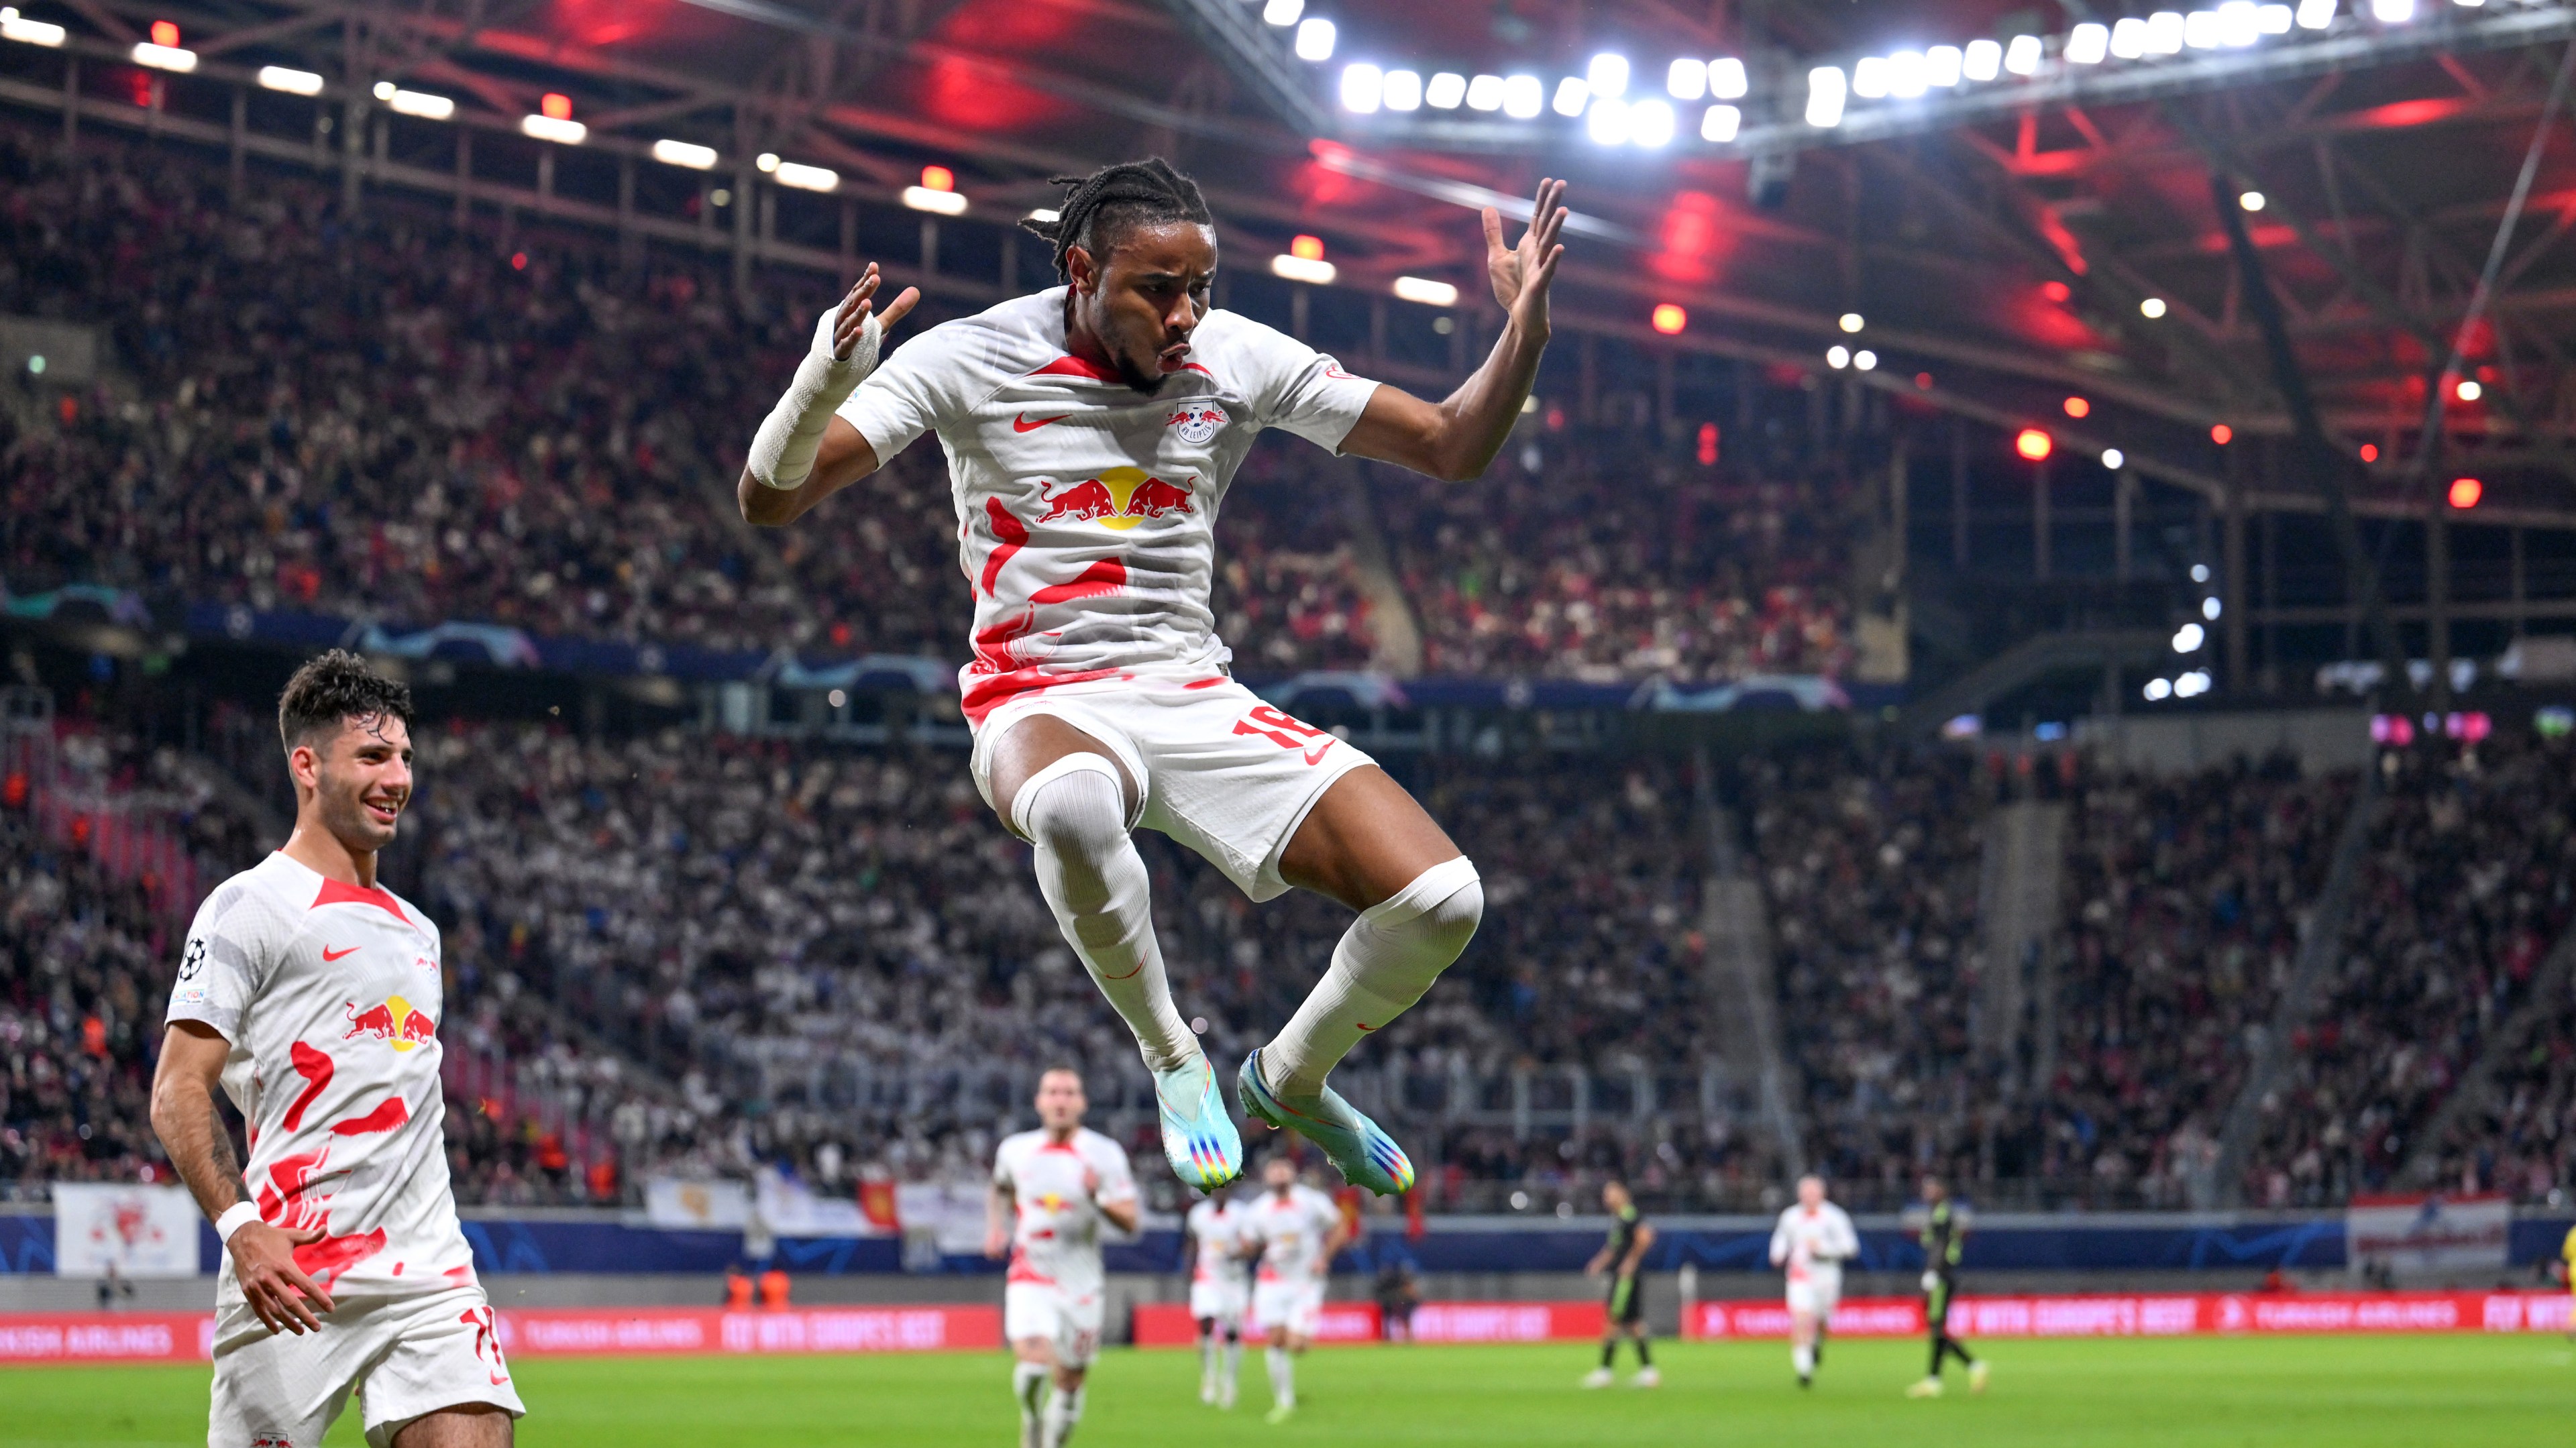 Christopher Nkunku of RB Leipzig celebrates scoring their side's second goal with teammates during the UEFA Champions League group F match between RB Leipzig and Real Madrid at Red Bull Arena on October 25, 2022 in Leipzig, Germany.